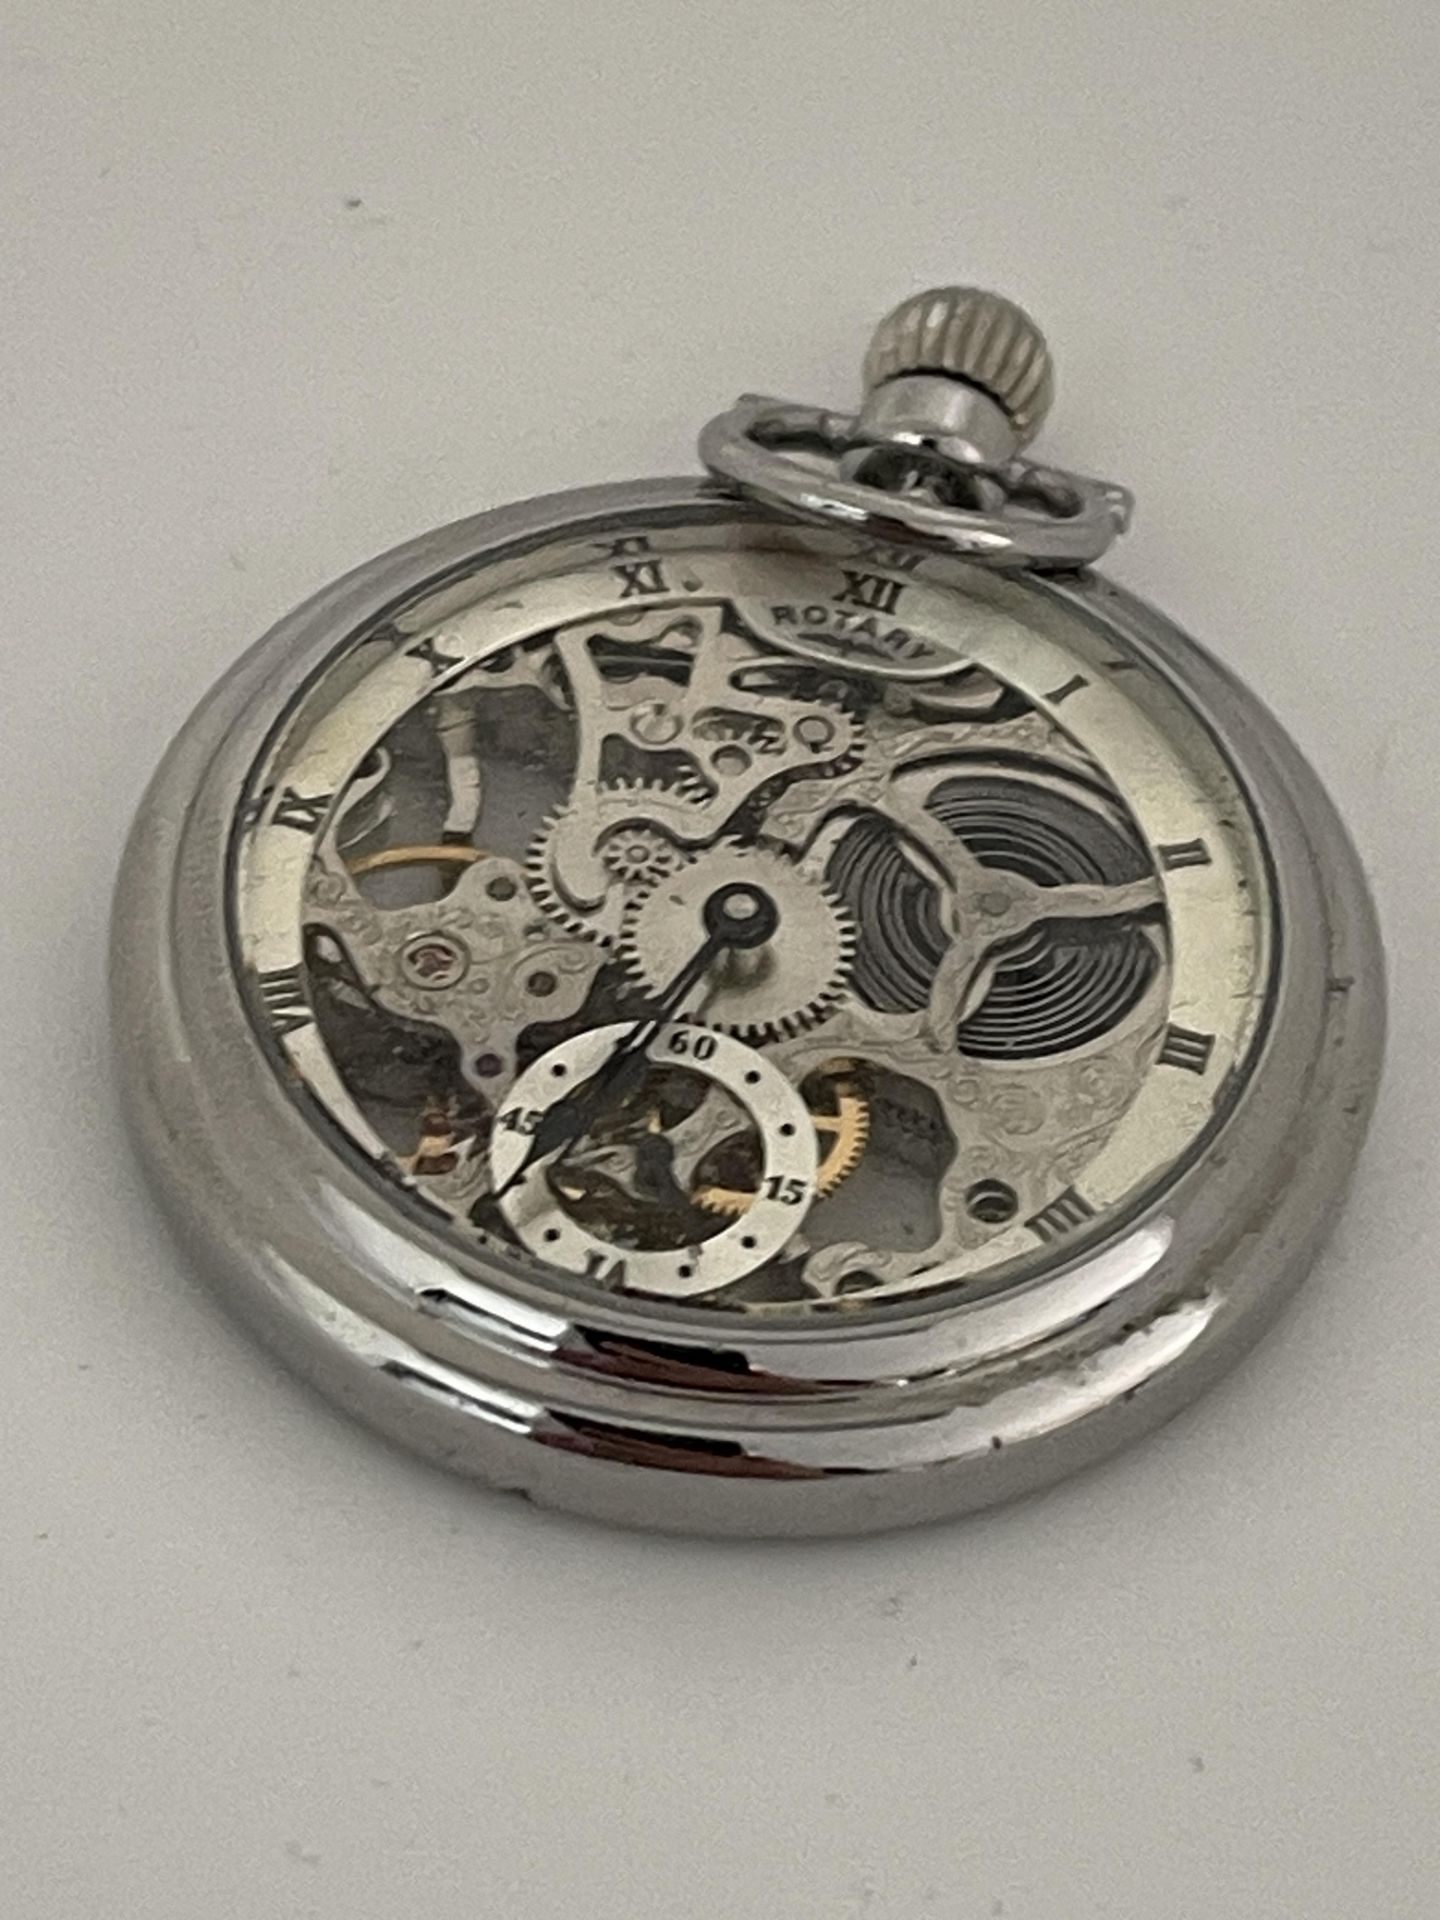 Rotary pocket watch - Image 4 of 4